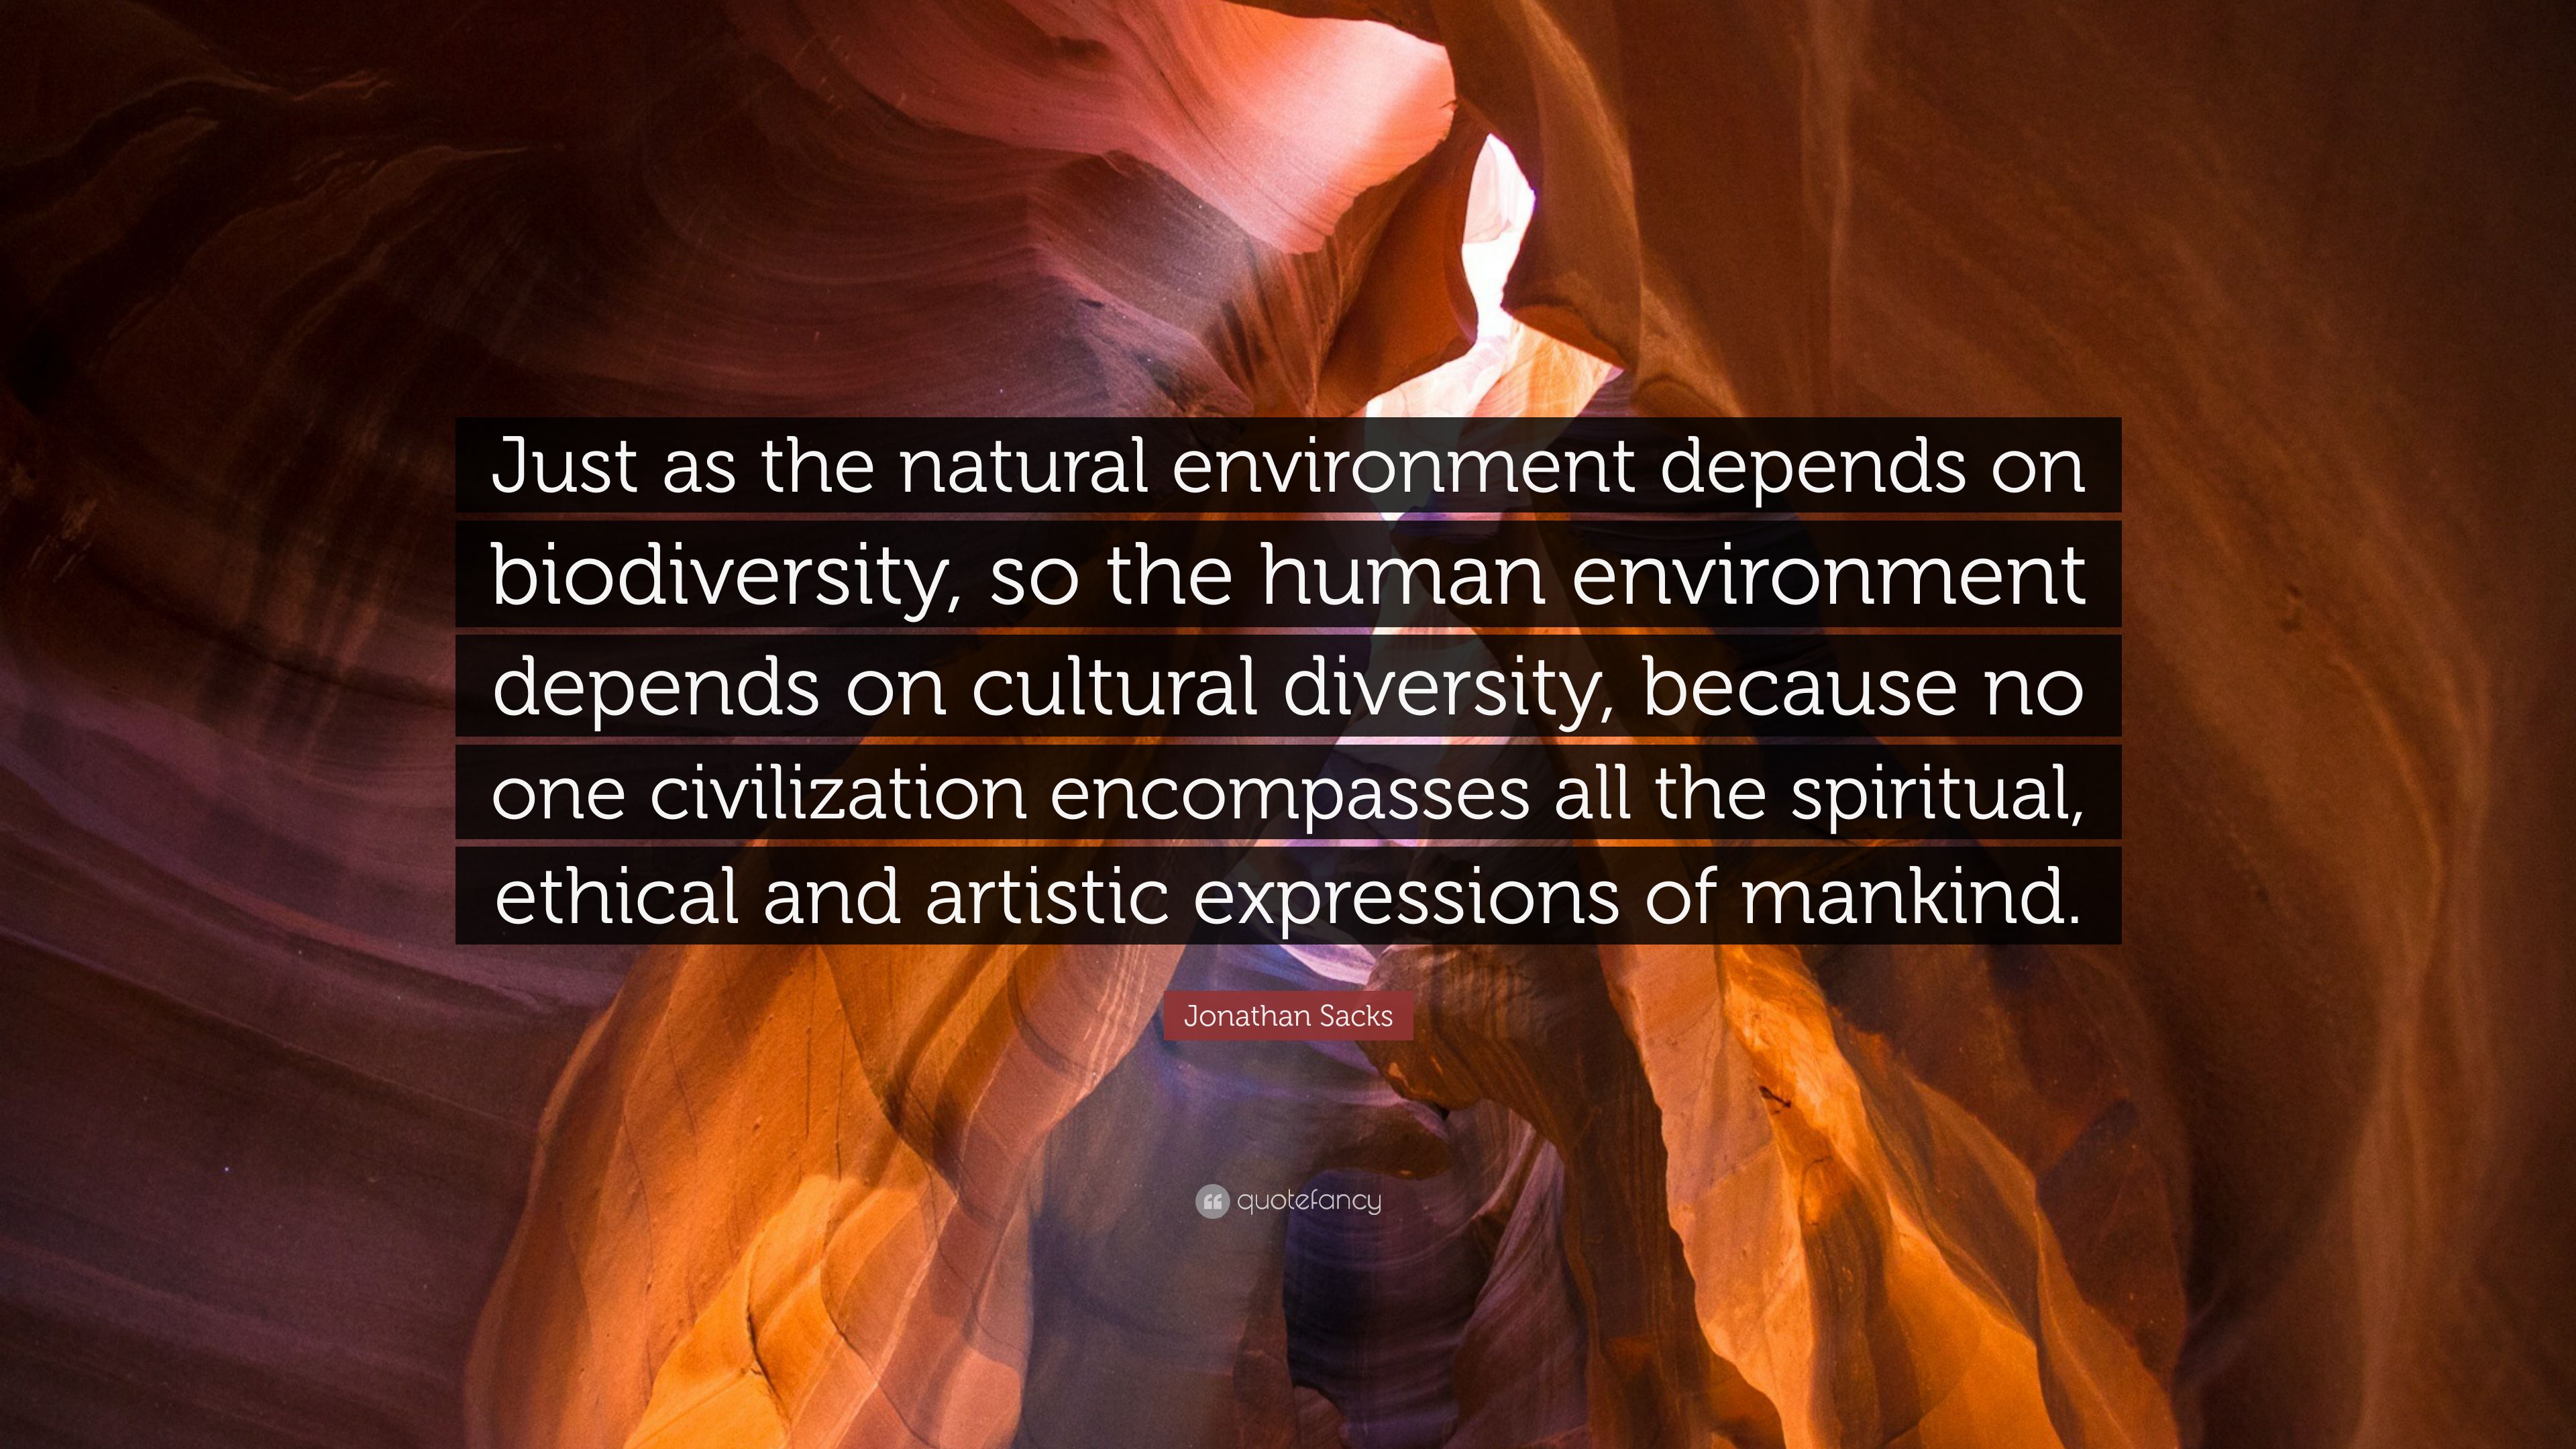 Jonathan Sacks Quote: “Just as the natural environment depends on biodiversity, so the human environment depends on cultural diversity, because.” (7 wallpaper)